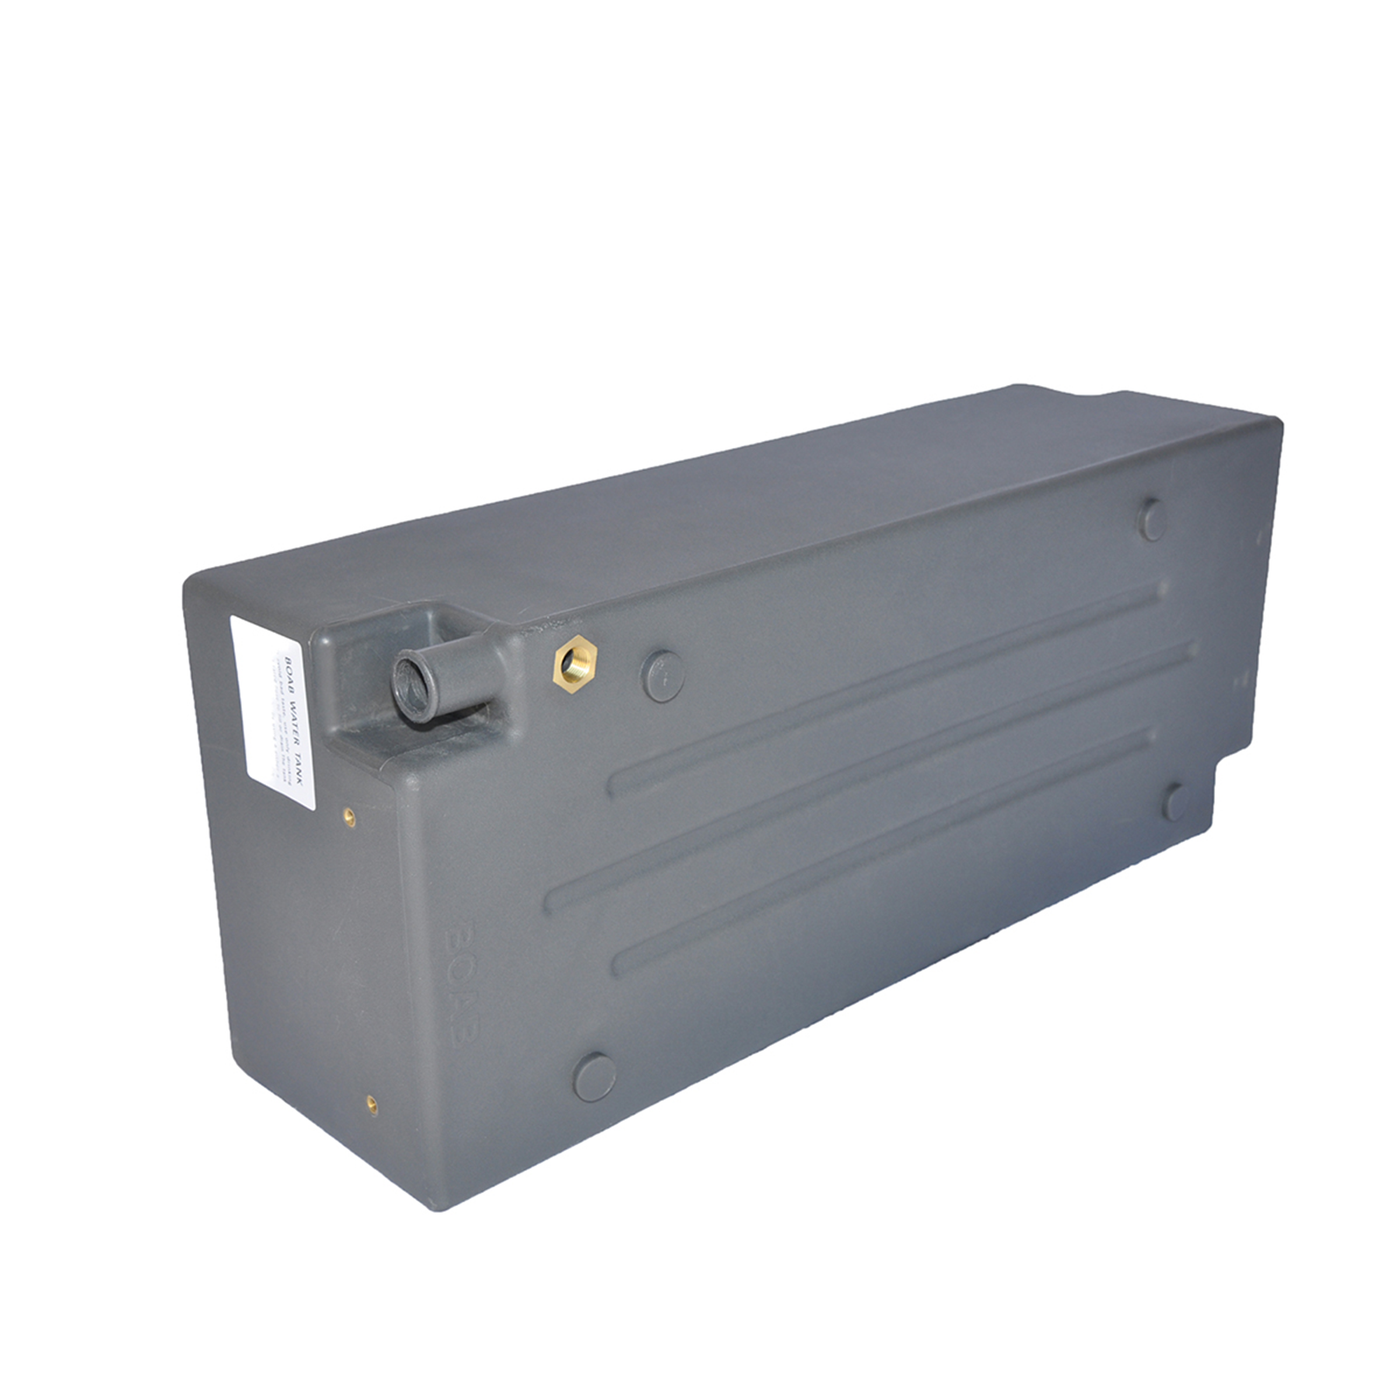 58 LITRE RECTANGLE VERTICAL OR LAY FLAT, POLY WATER TANK